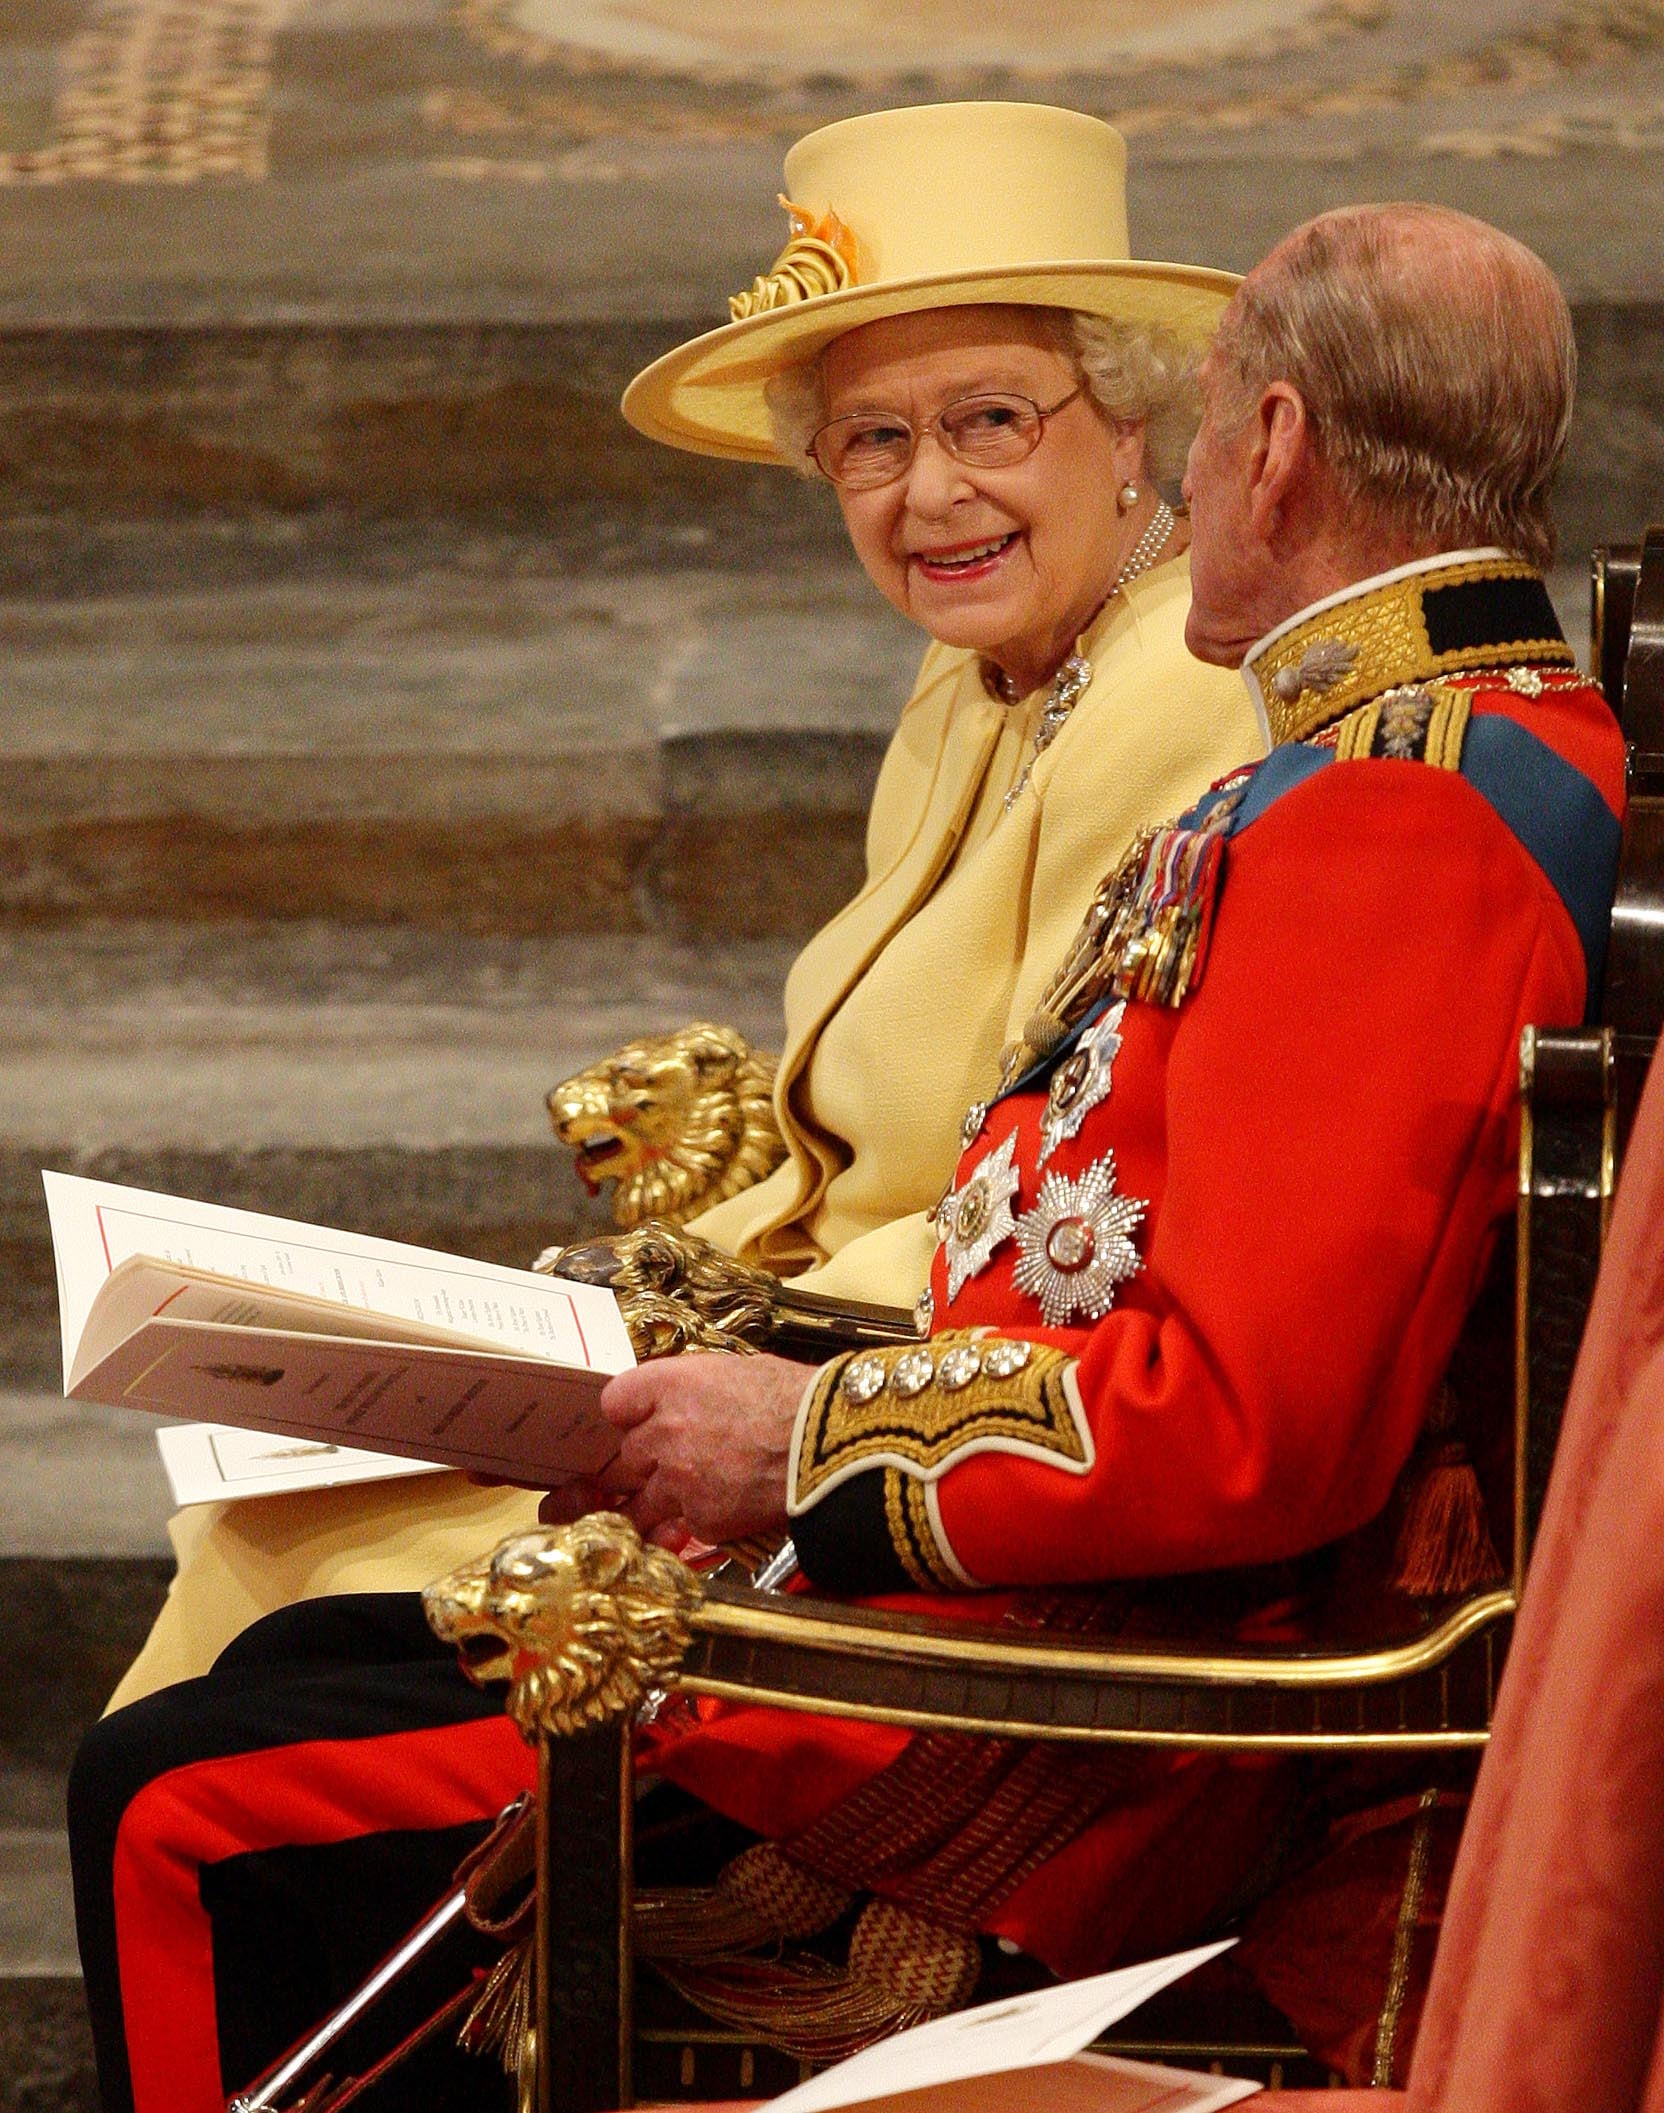 Queen Elizabeth II and Prince Philip at the wedding of Prince William and Kate Middleton in 2011